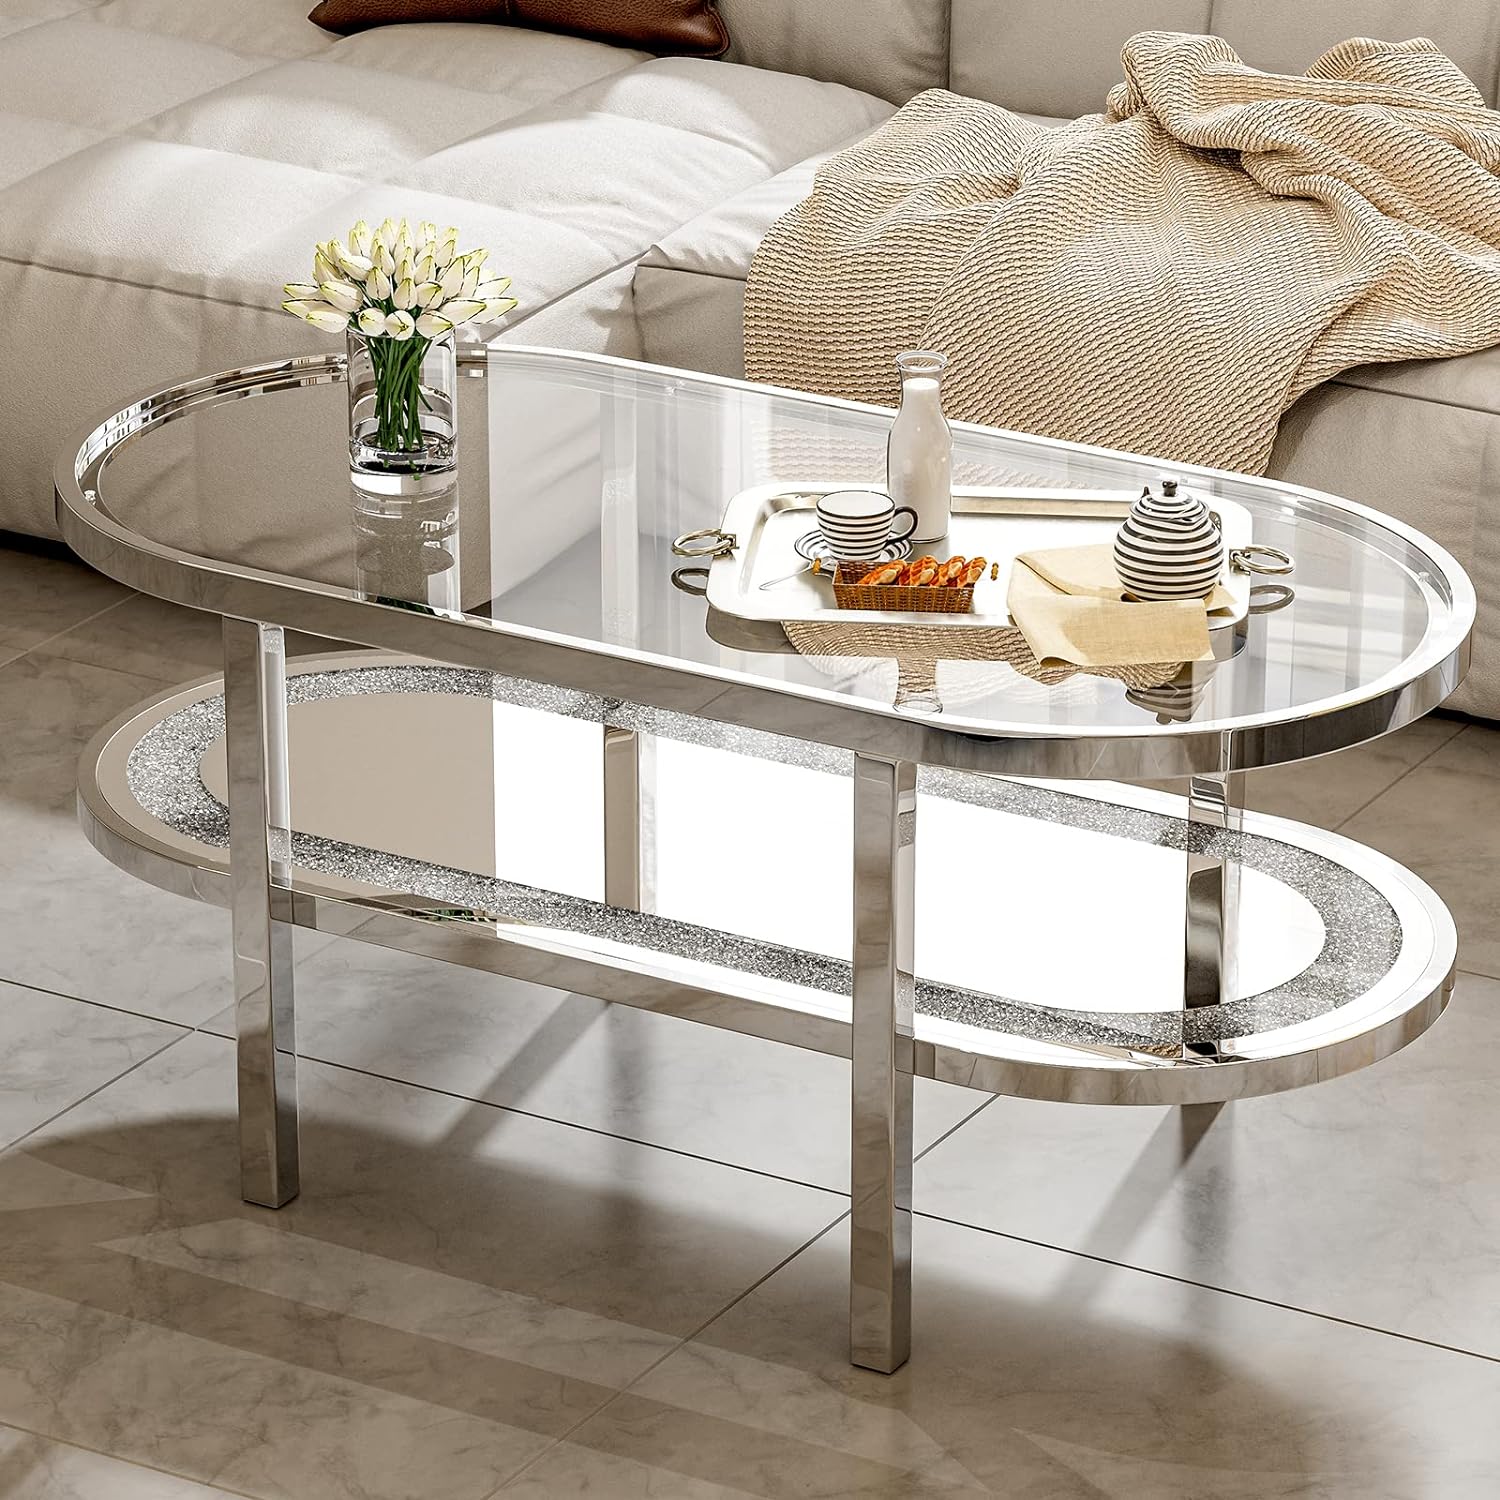 IKIFLY Glass Coffee Table with 2 Tier Glass & Mirror Crystal Boards, Mirrored Rectangle End Table Coffee Tea Table with Stainless Steel Legs for Living Room Bedroom